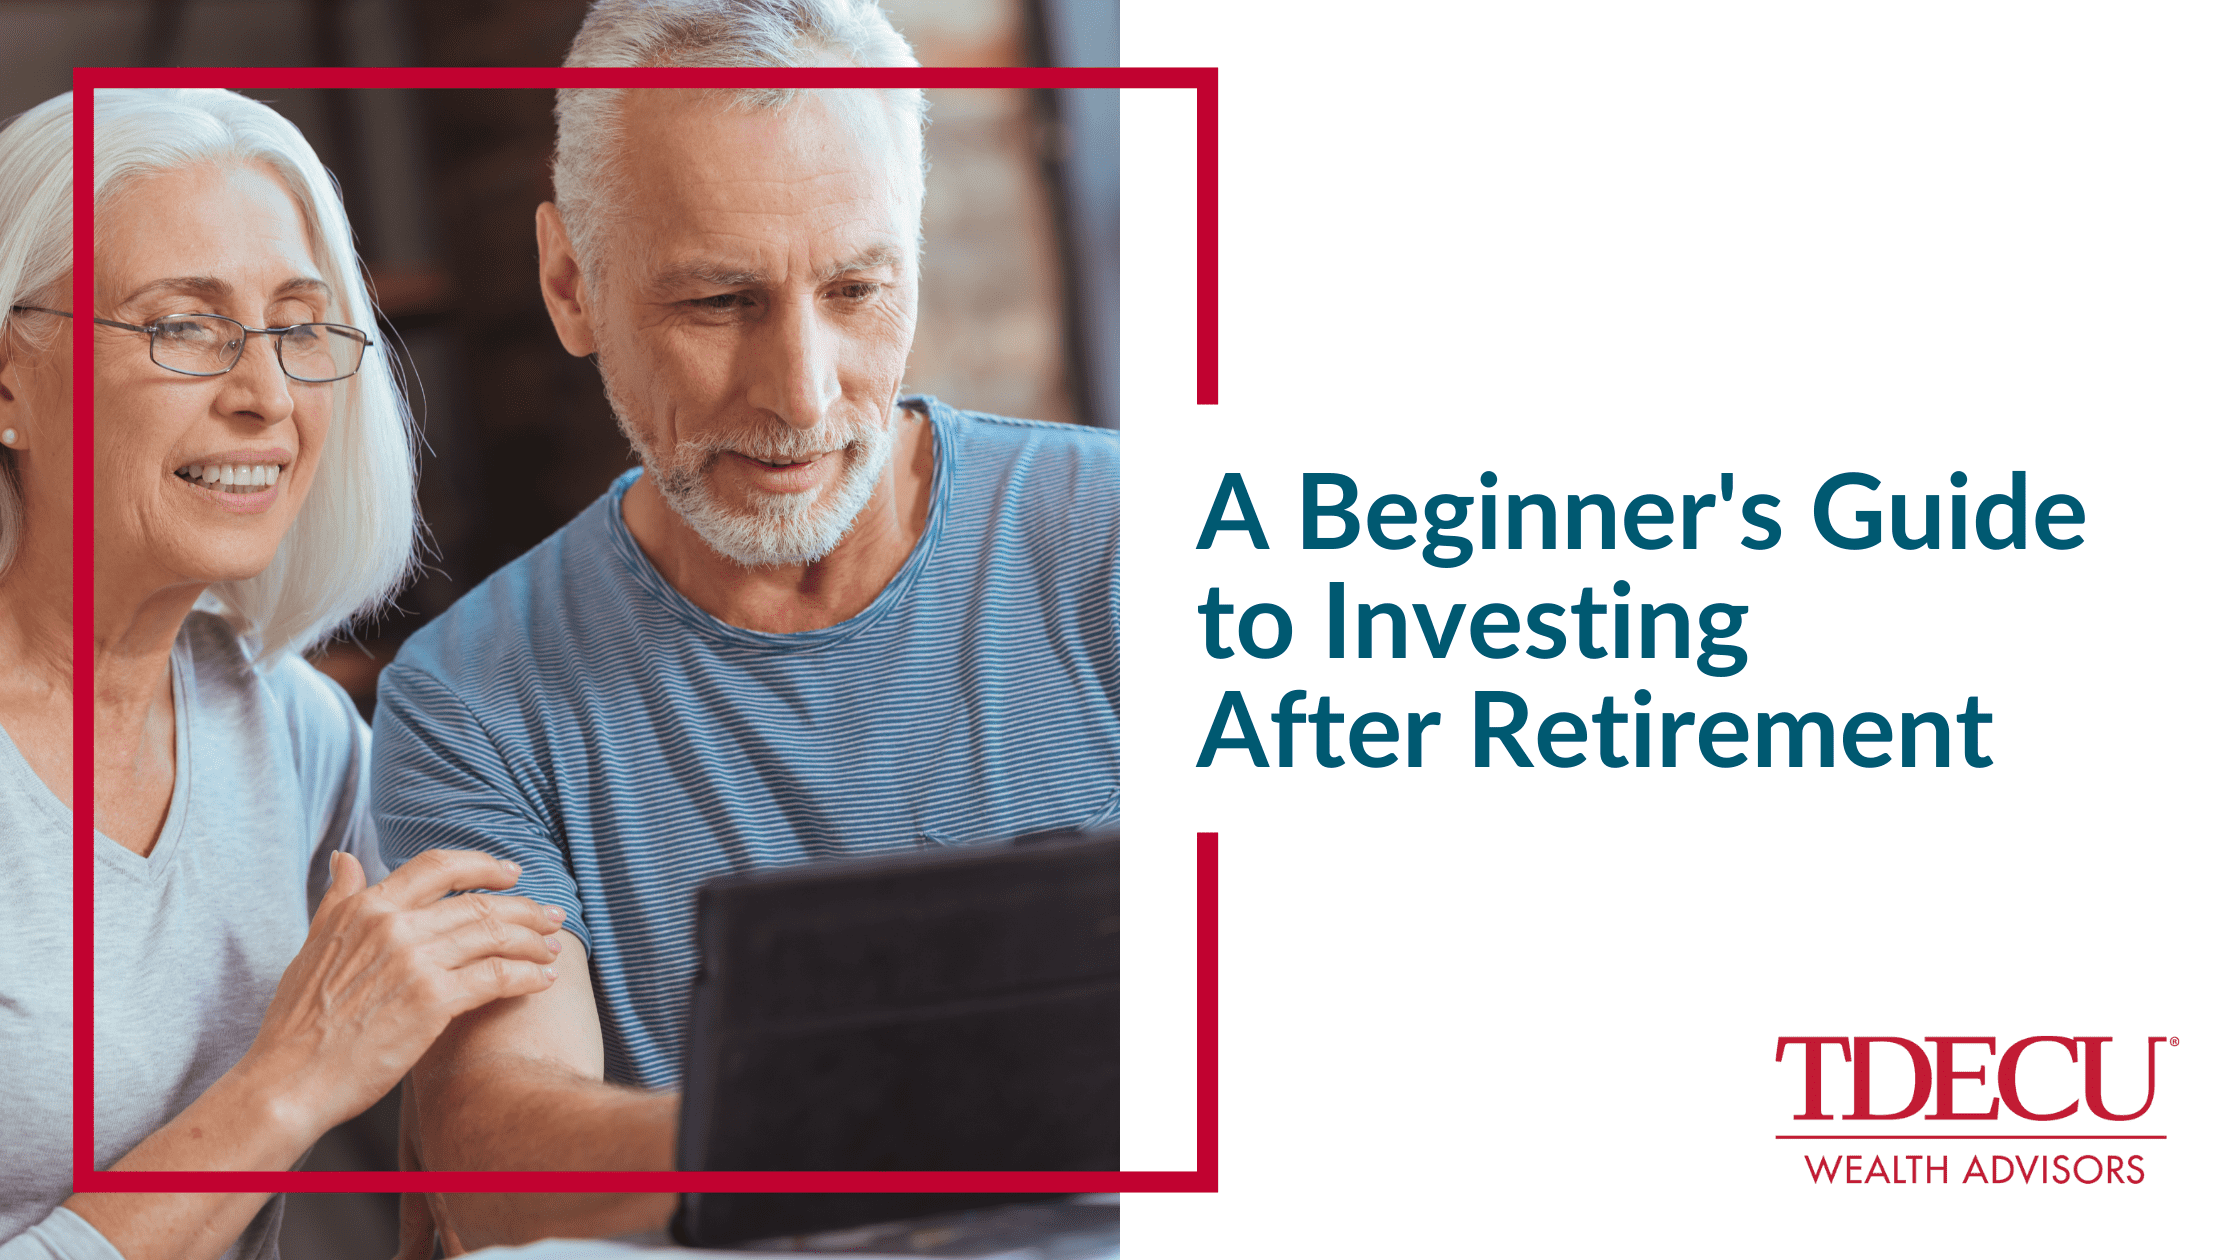 A Beginner’s Guide to Investing After Retirement